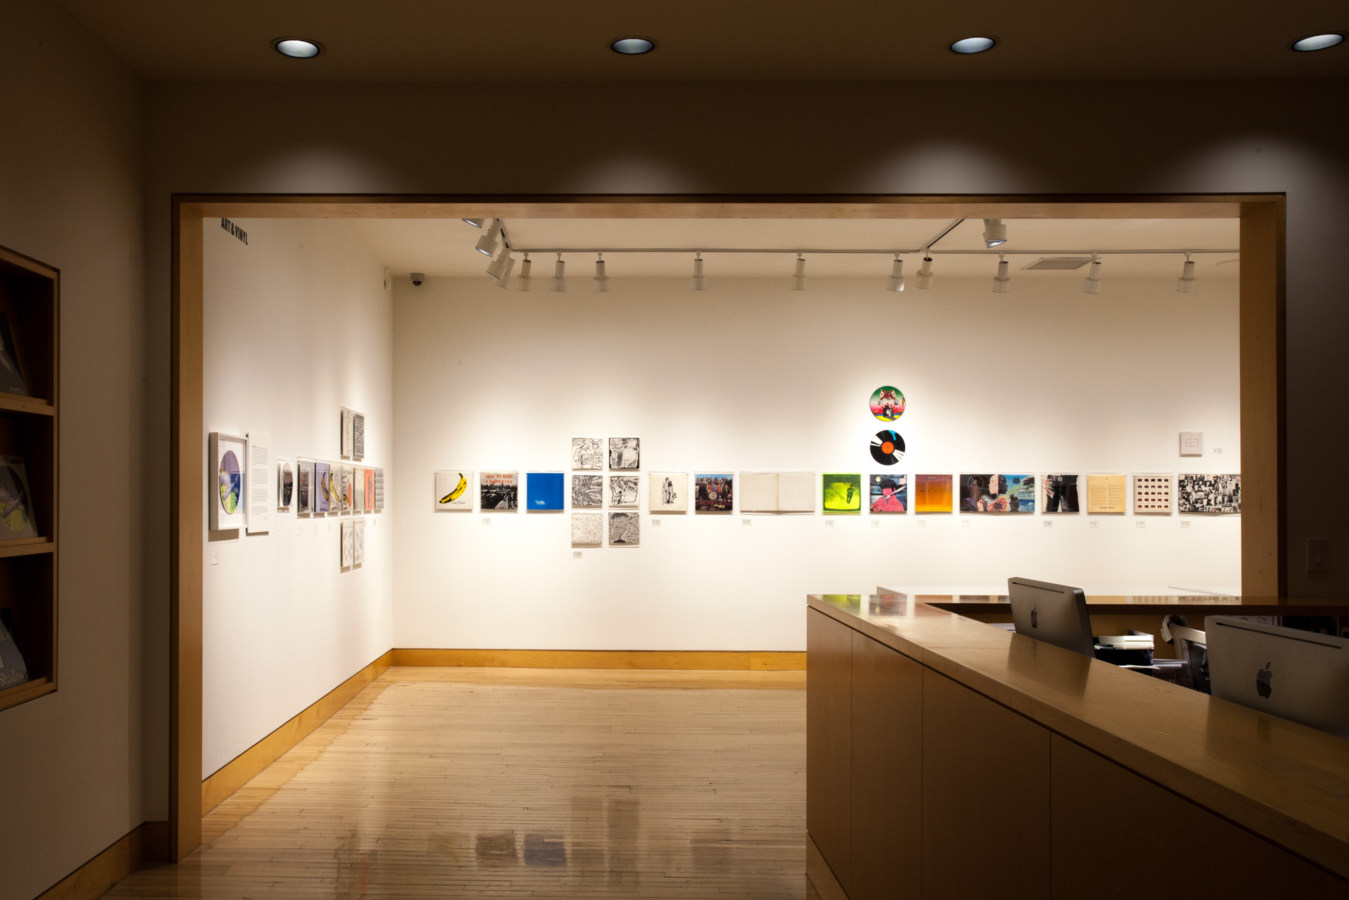 Color image of gallery entryway exhibiting vinyl records and record sleeves on white gallery walls